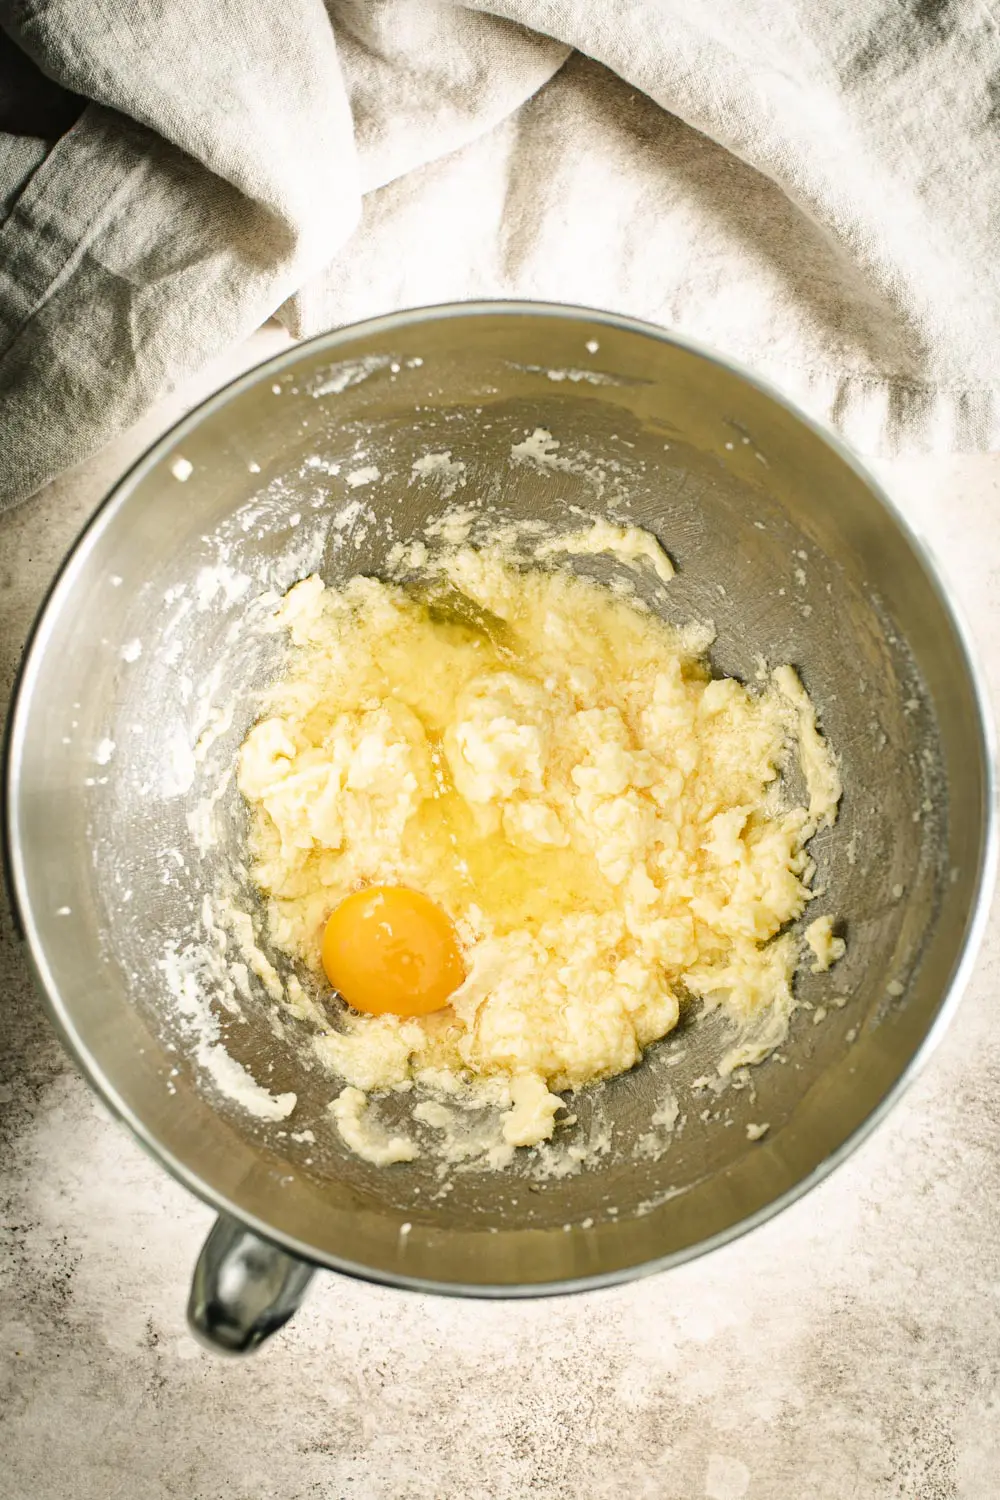 Egg in torte batter in a silver mixing bowl.